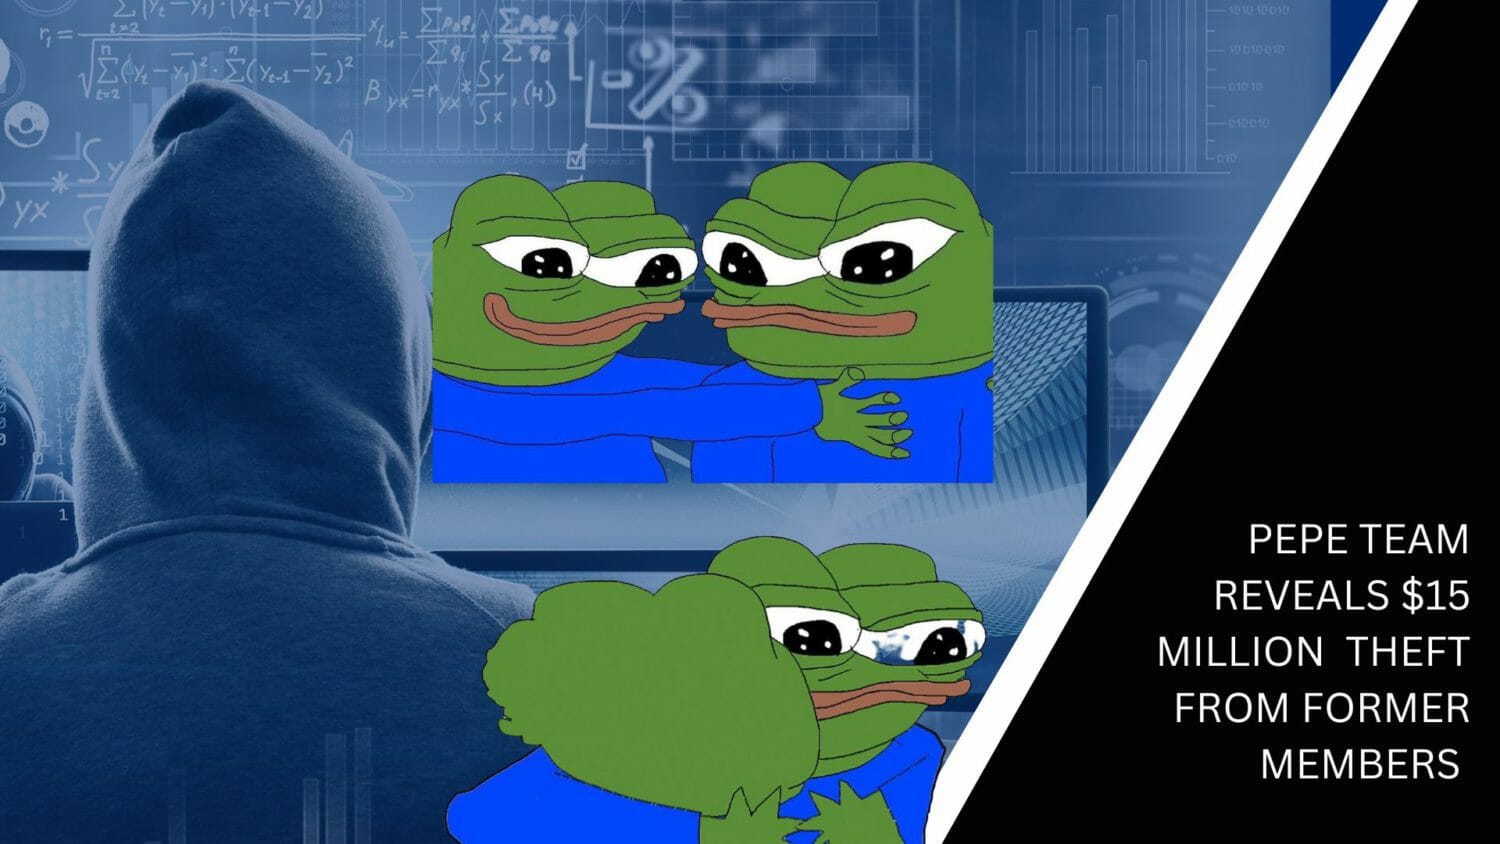 Pepe Team Reveals $15 Million  Theft From Former Members 